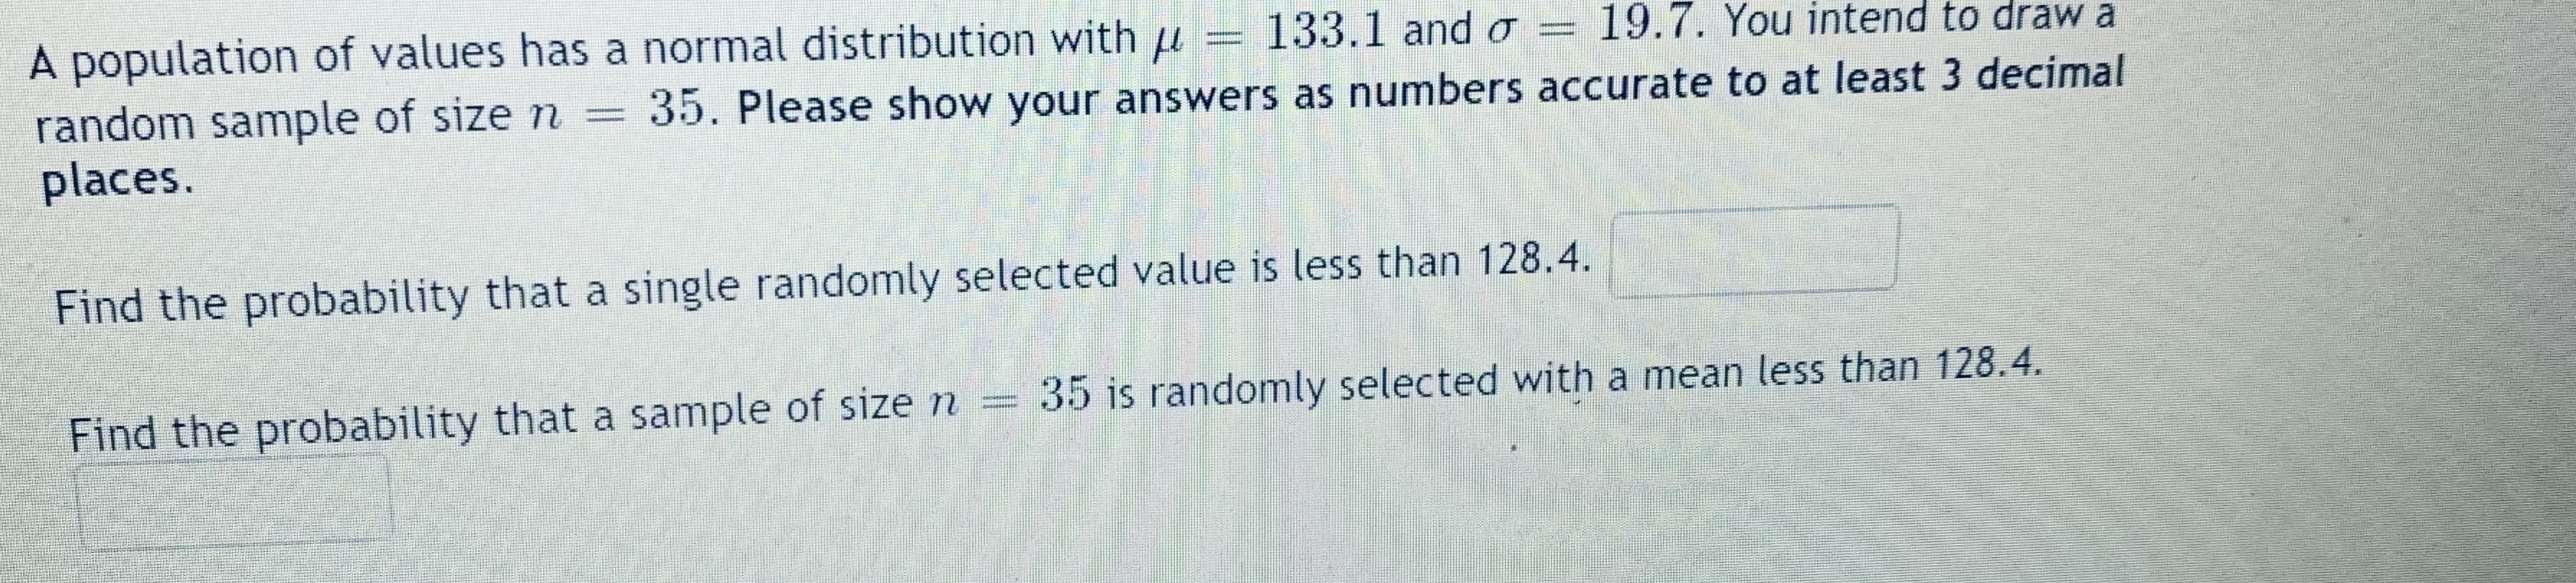 A population of values has a normal distribution with u
random sample of size n =
places.
133.1 and o
19.7. You intend to draw a
35. Please show your answers as numbers accurate to at least 3 decimal
Find the probability that a single randomly selected value is less than 128.4.
Find the probability that a sample of size n
35 is randomly selected with a mean less than 128.4.
